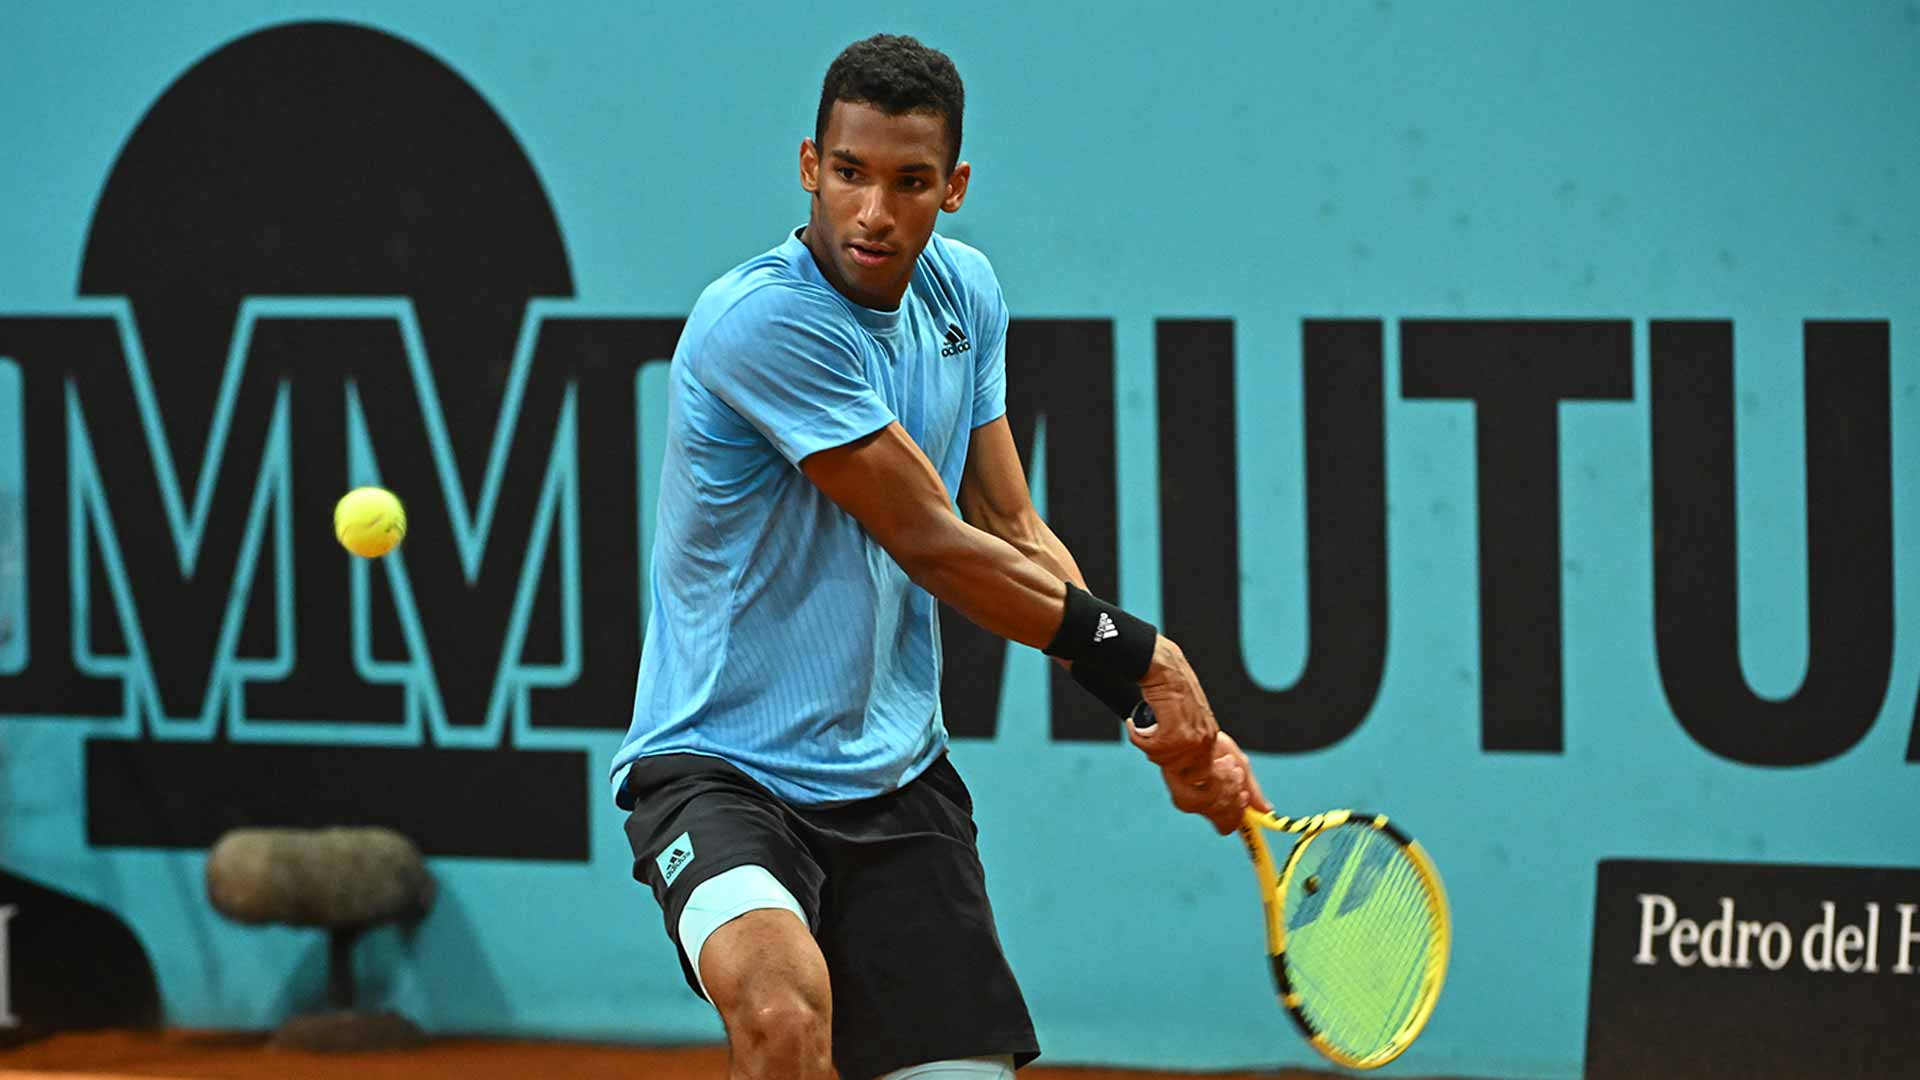 Felix Auger-Aliassime reached the quarter-finals in Madrid last year.